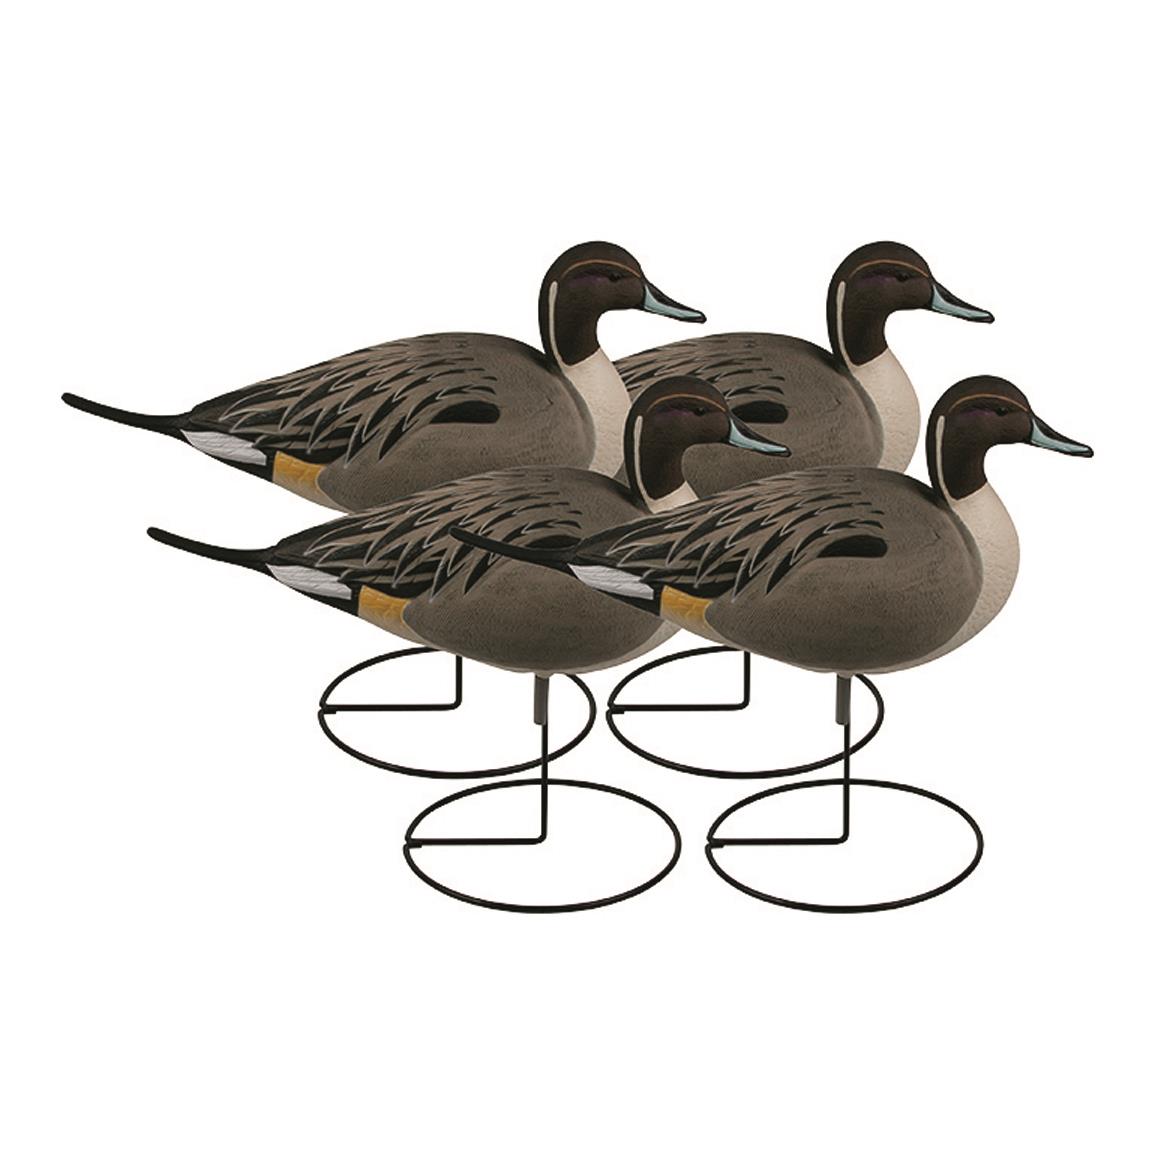 SIZE PUDDLER PACK II DUCK DECOYS AVERY GHG GREENHEAD GEAR LIFE 